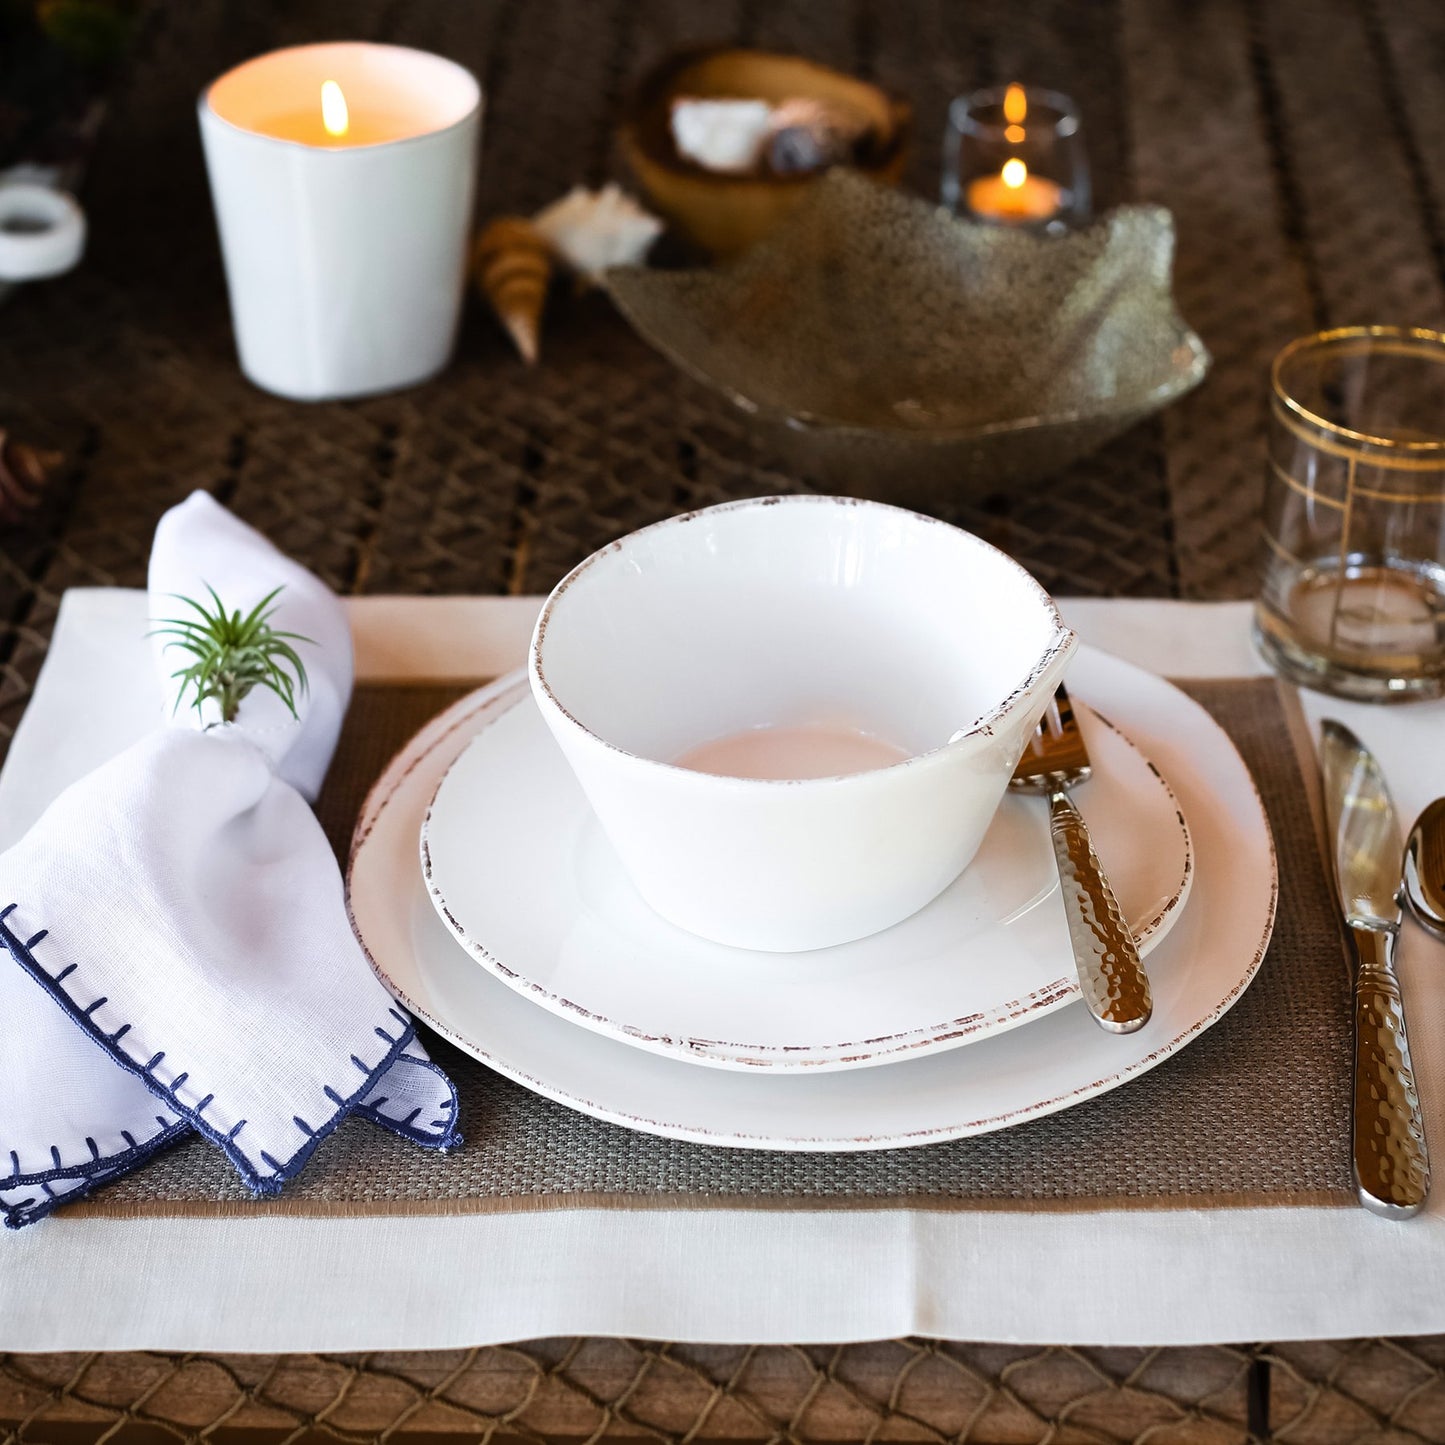 table setting with plates, bowl and silverware with candles in the center.